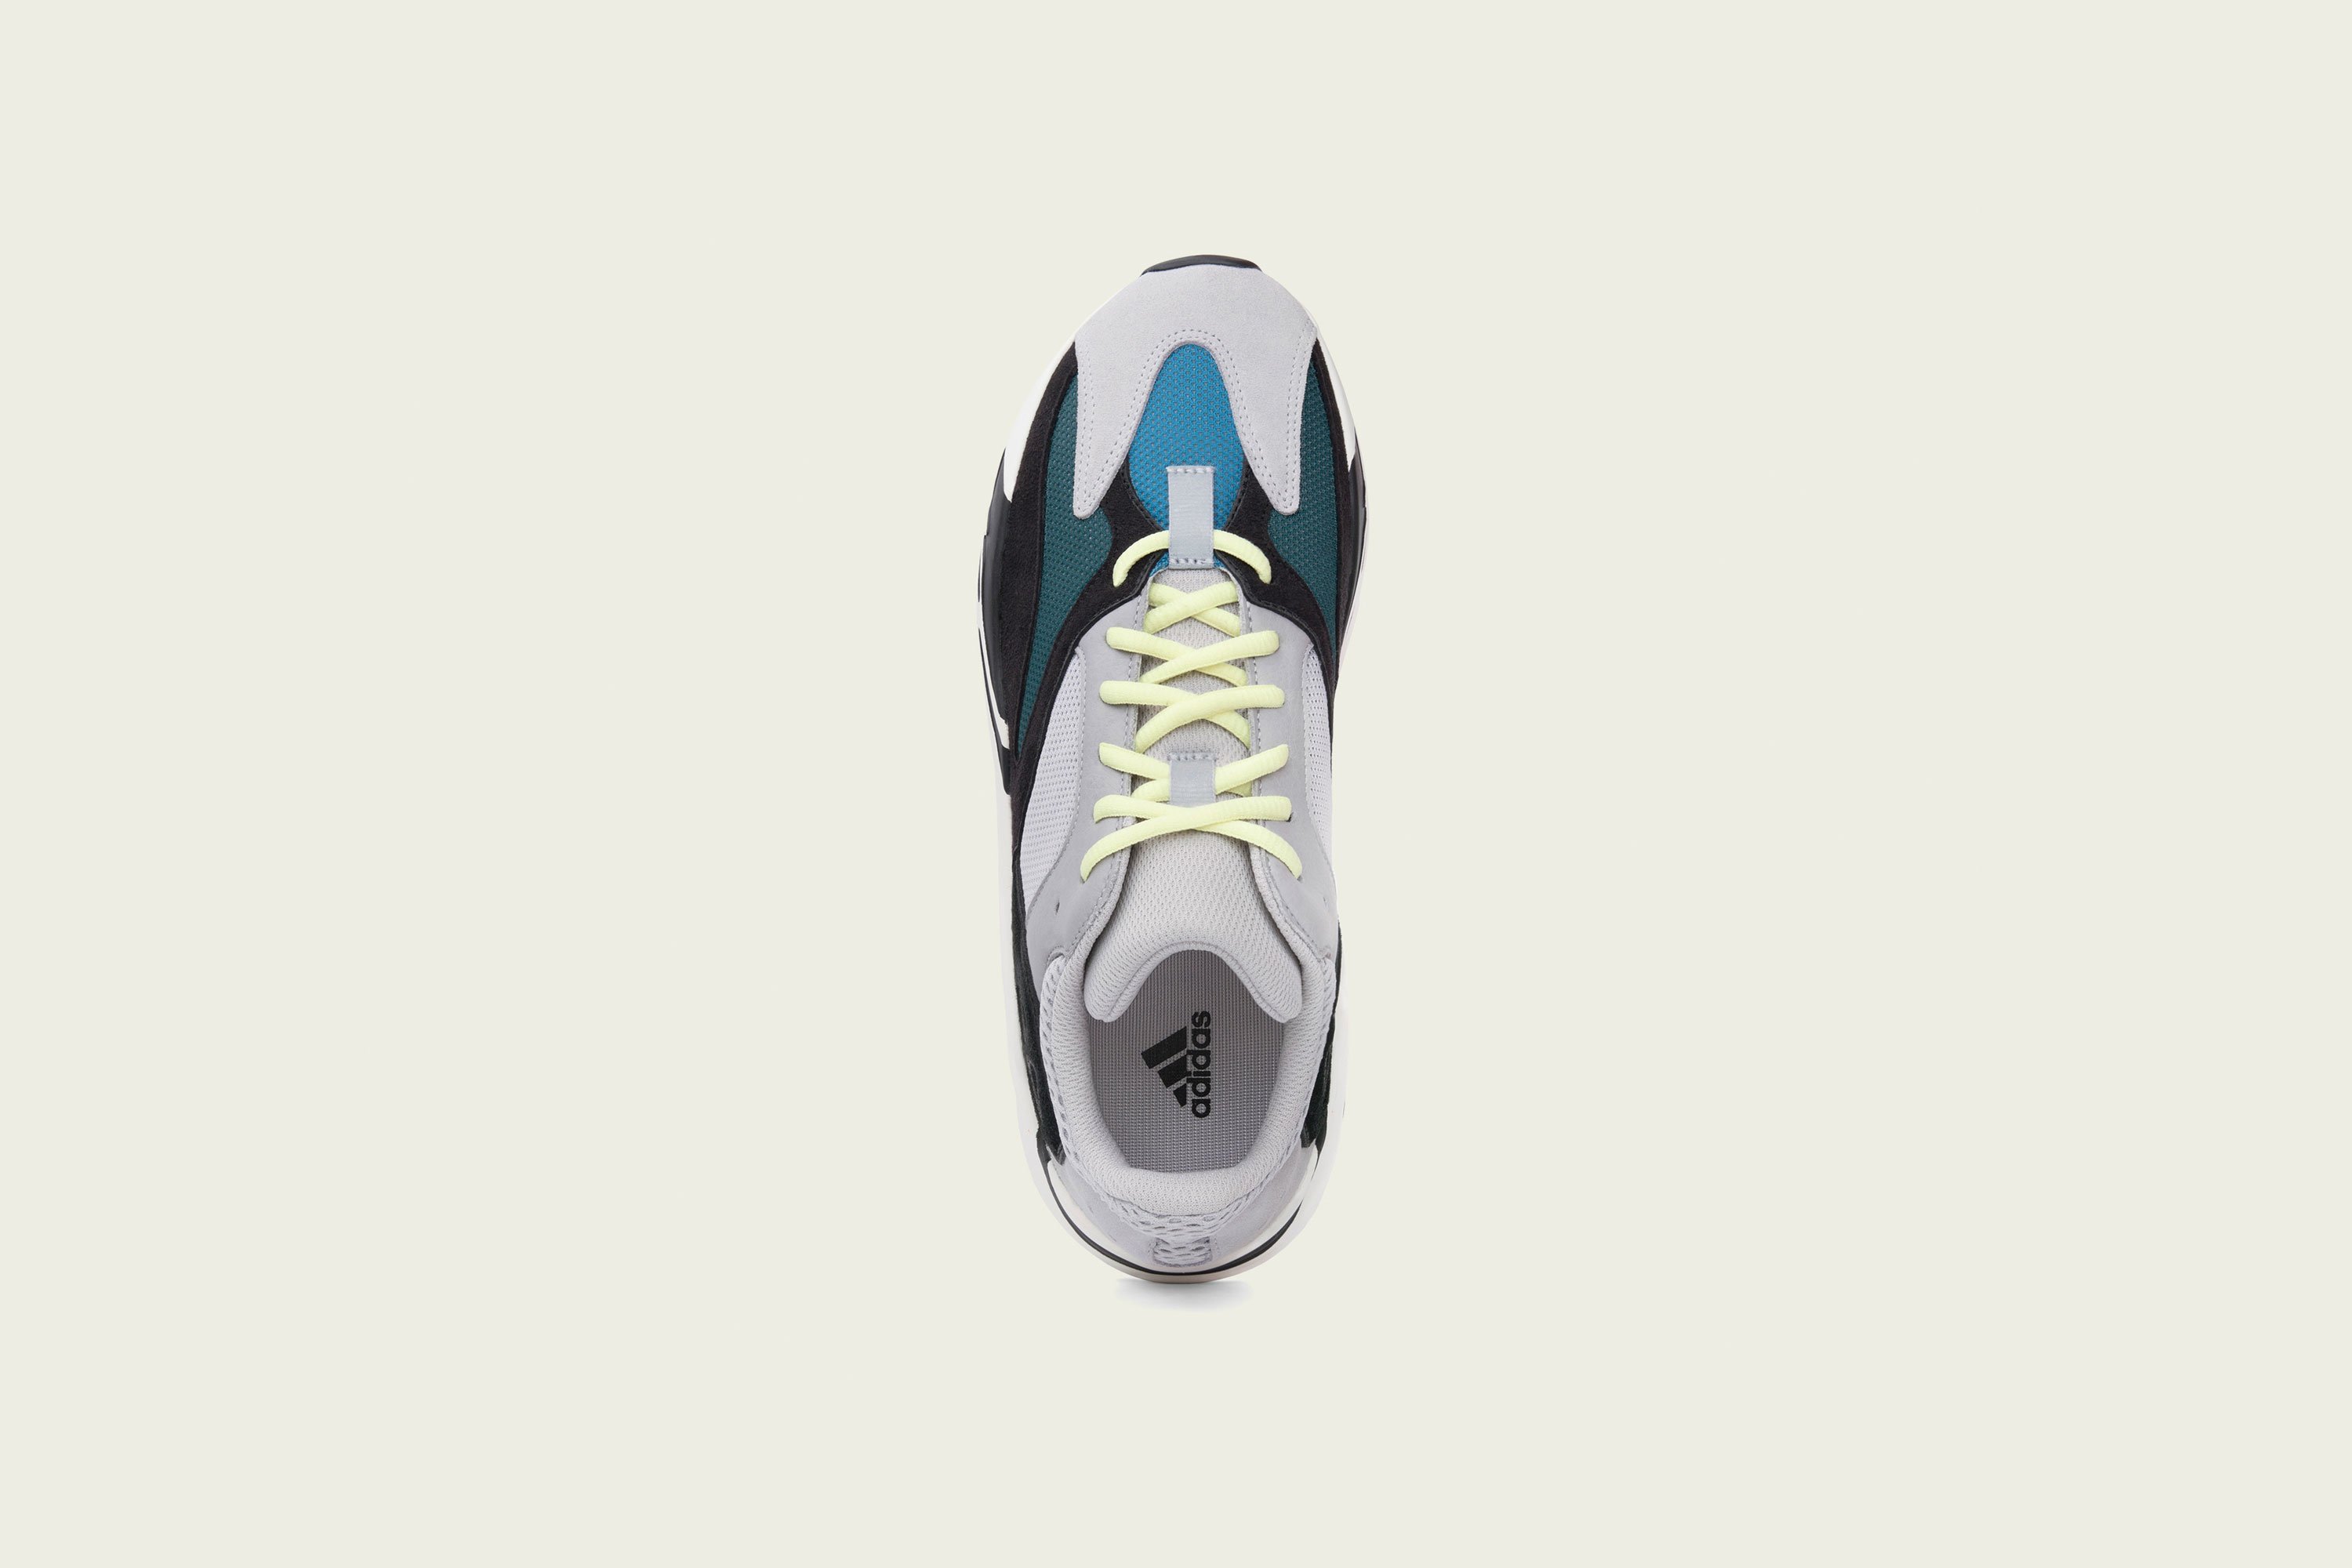 adidas - Yeezy Boost 700 - Wave Runner - Up There